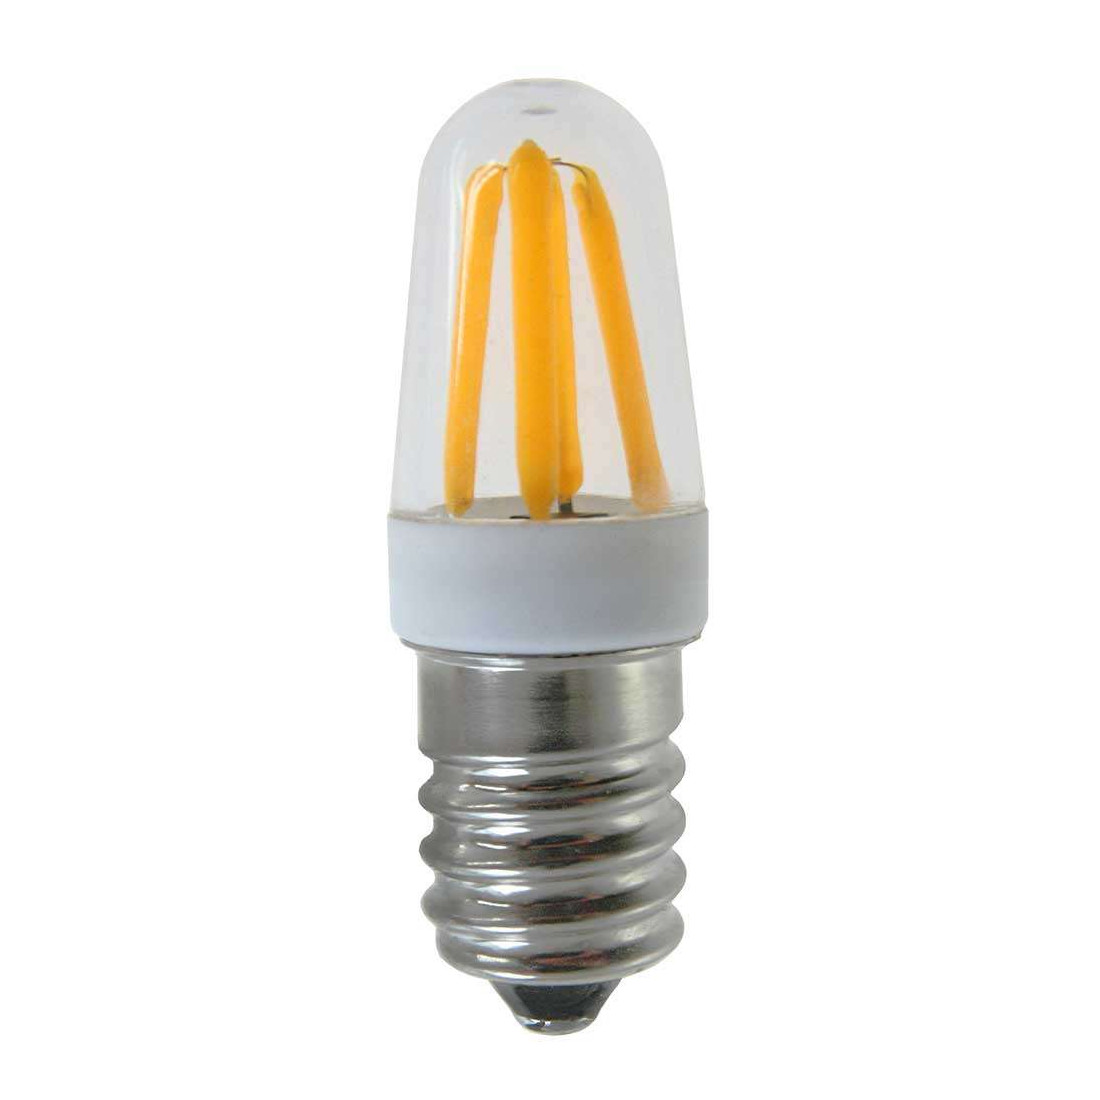 Les ampoules LED AR111 basse consommation ✓ Starled